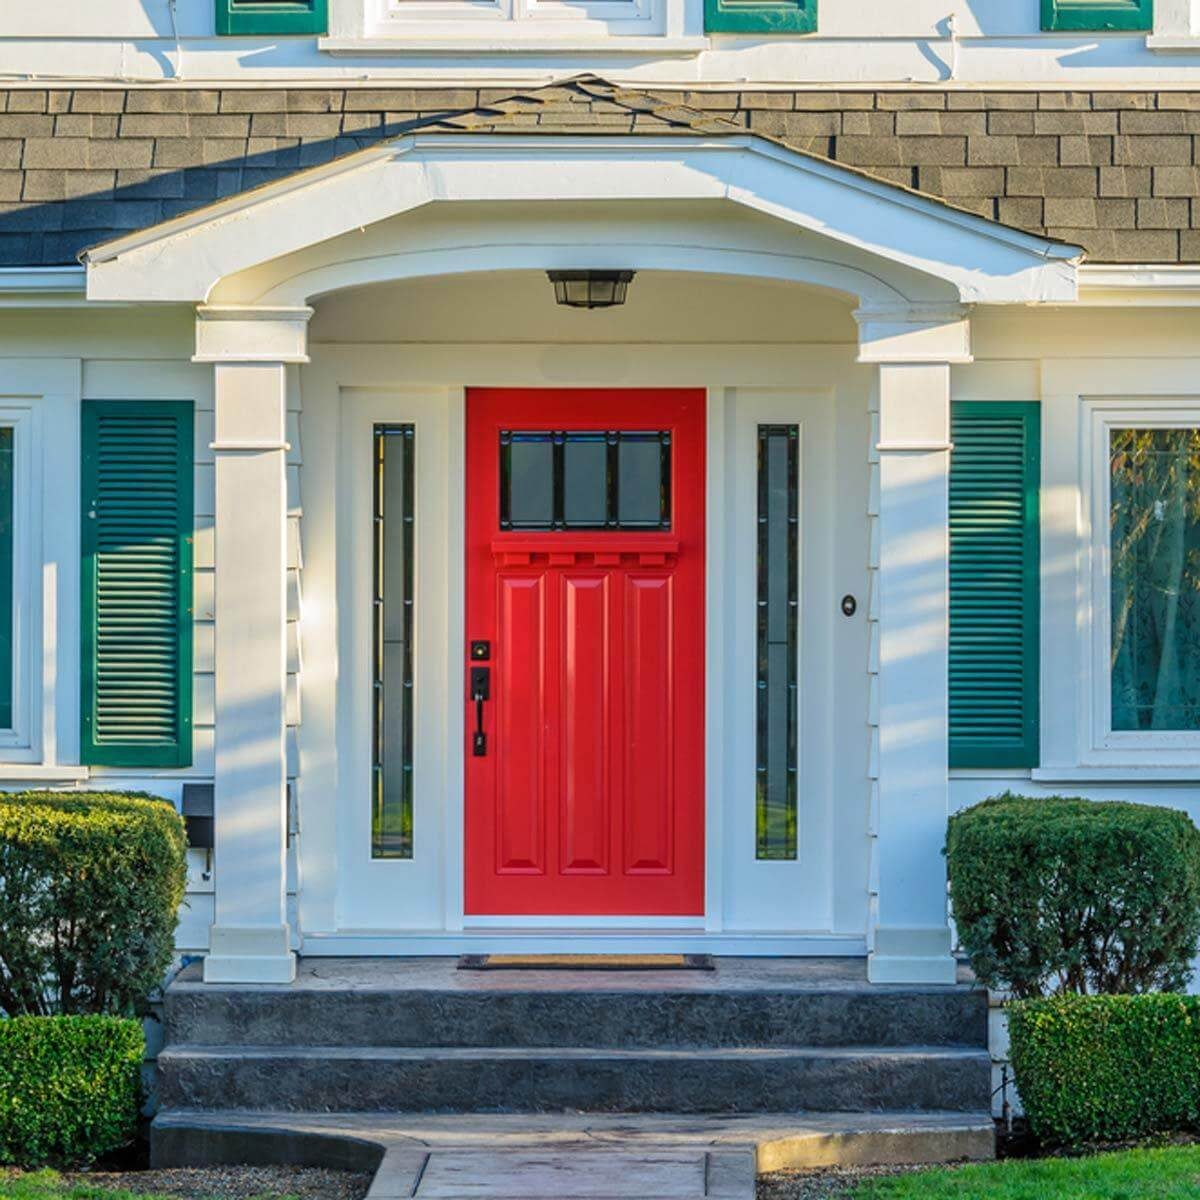 16 Ways to Add Curb Appeal For Less Than 50 Reader's